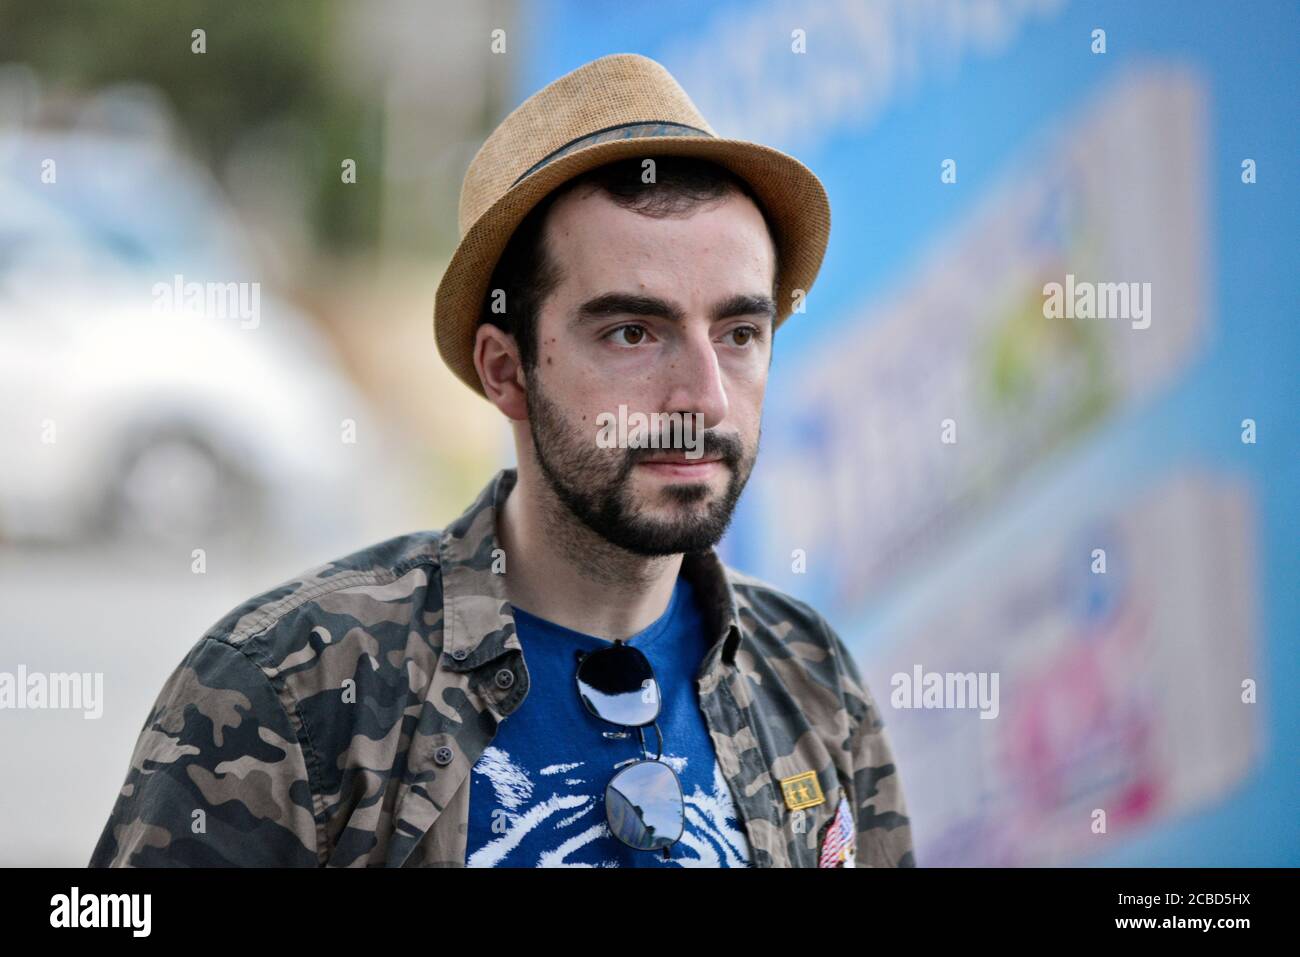 Ypung man wearing a hat in Didube bus station, Tbilisi, Republic of Georgia Stock Photo